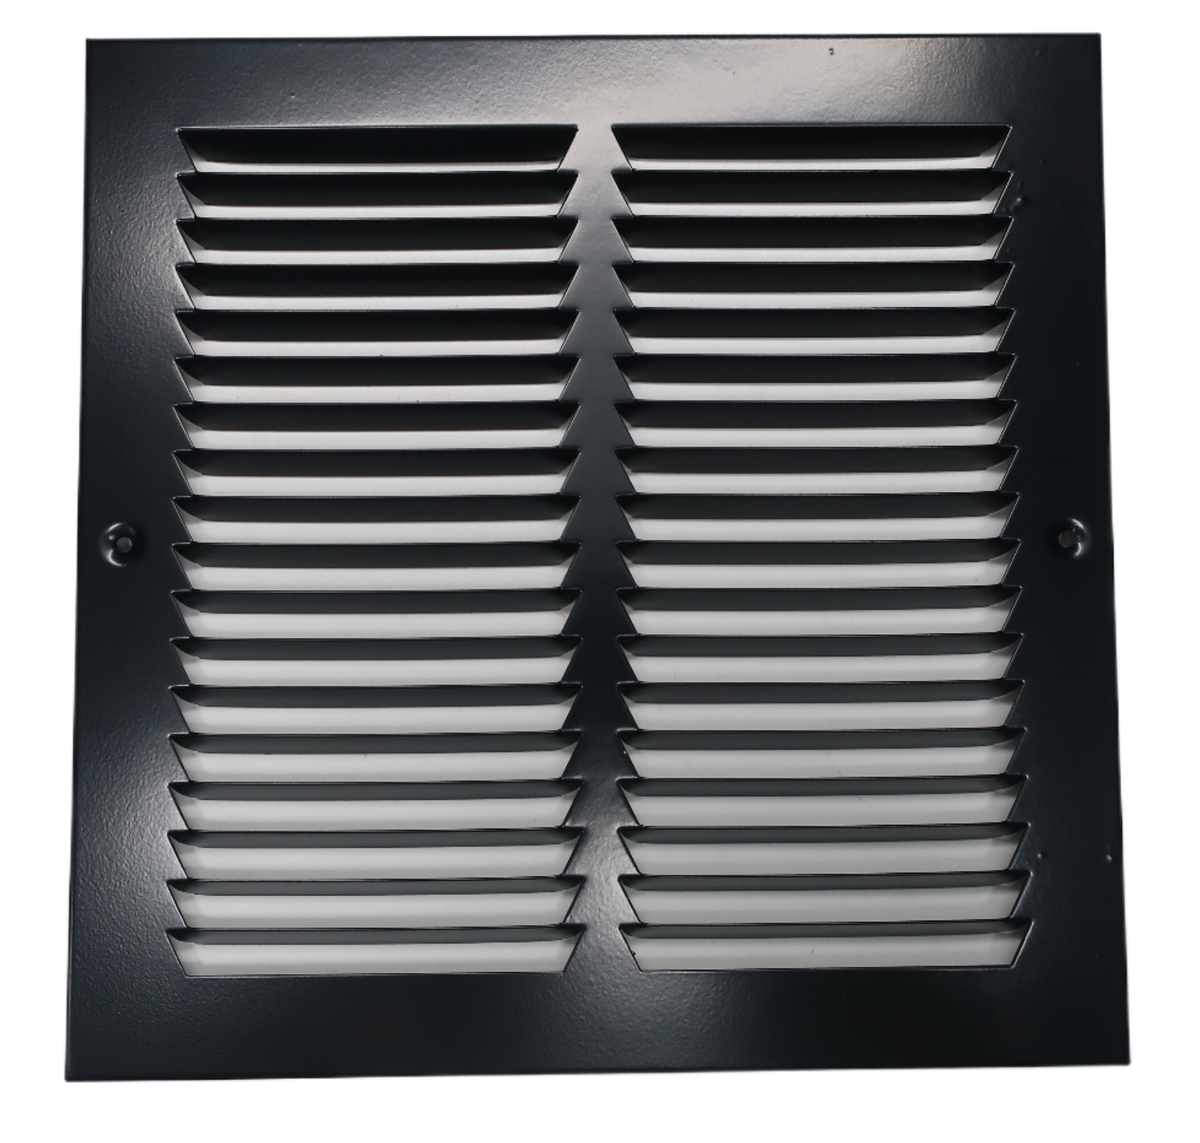 10&quot; X 10&quot; Air Vent Return Grilles - Sidewall and Ceiling - HVAC VENT DUCT COVER DIFFUSER - Steel